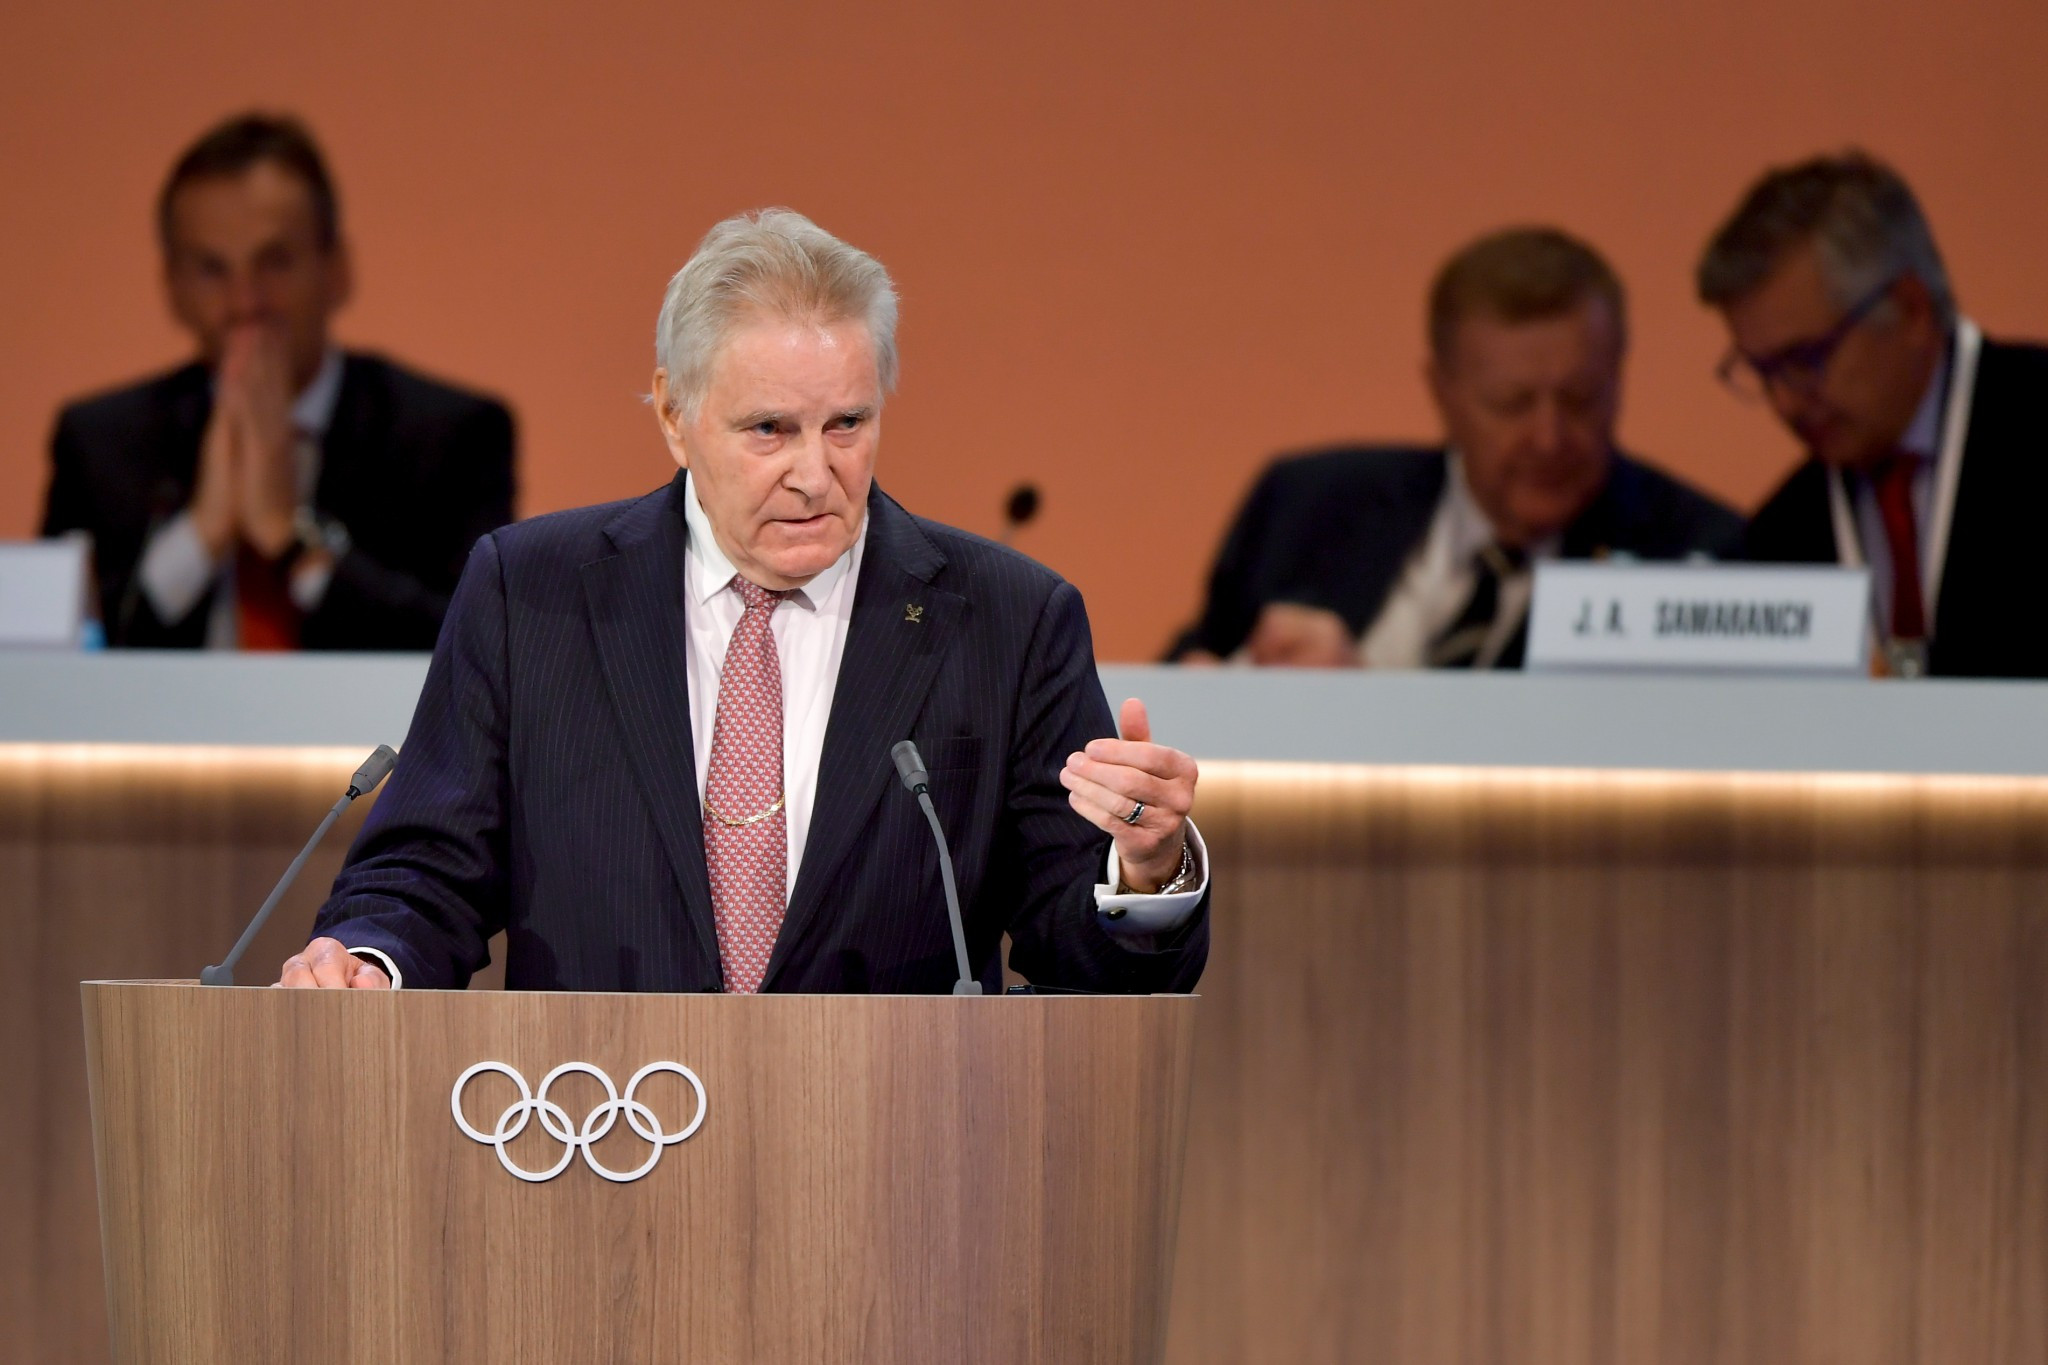 Switzerland's Denis Oswald provided one of the two reports on the IOC's Commissions into the Russian doping saga ©Getty Images